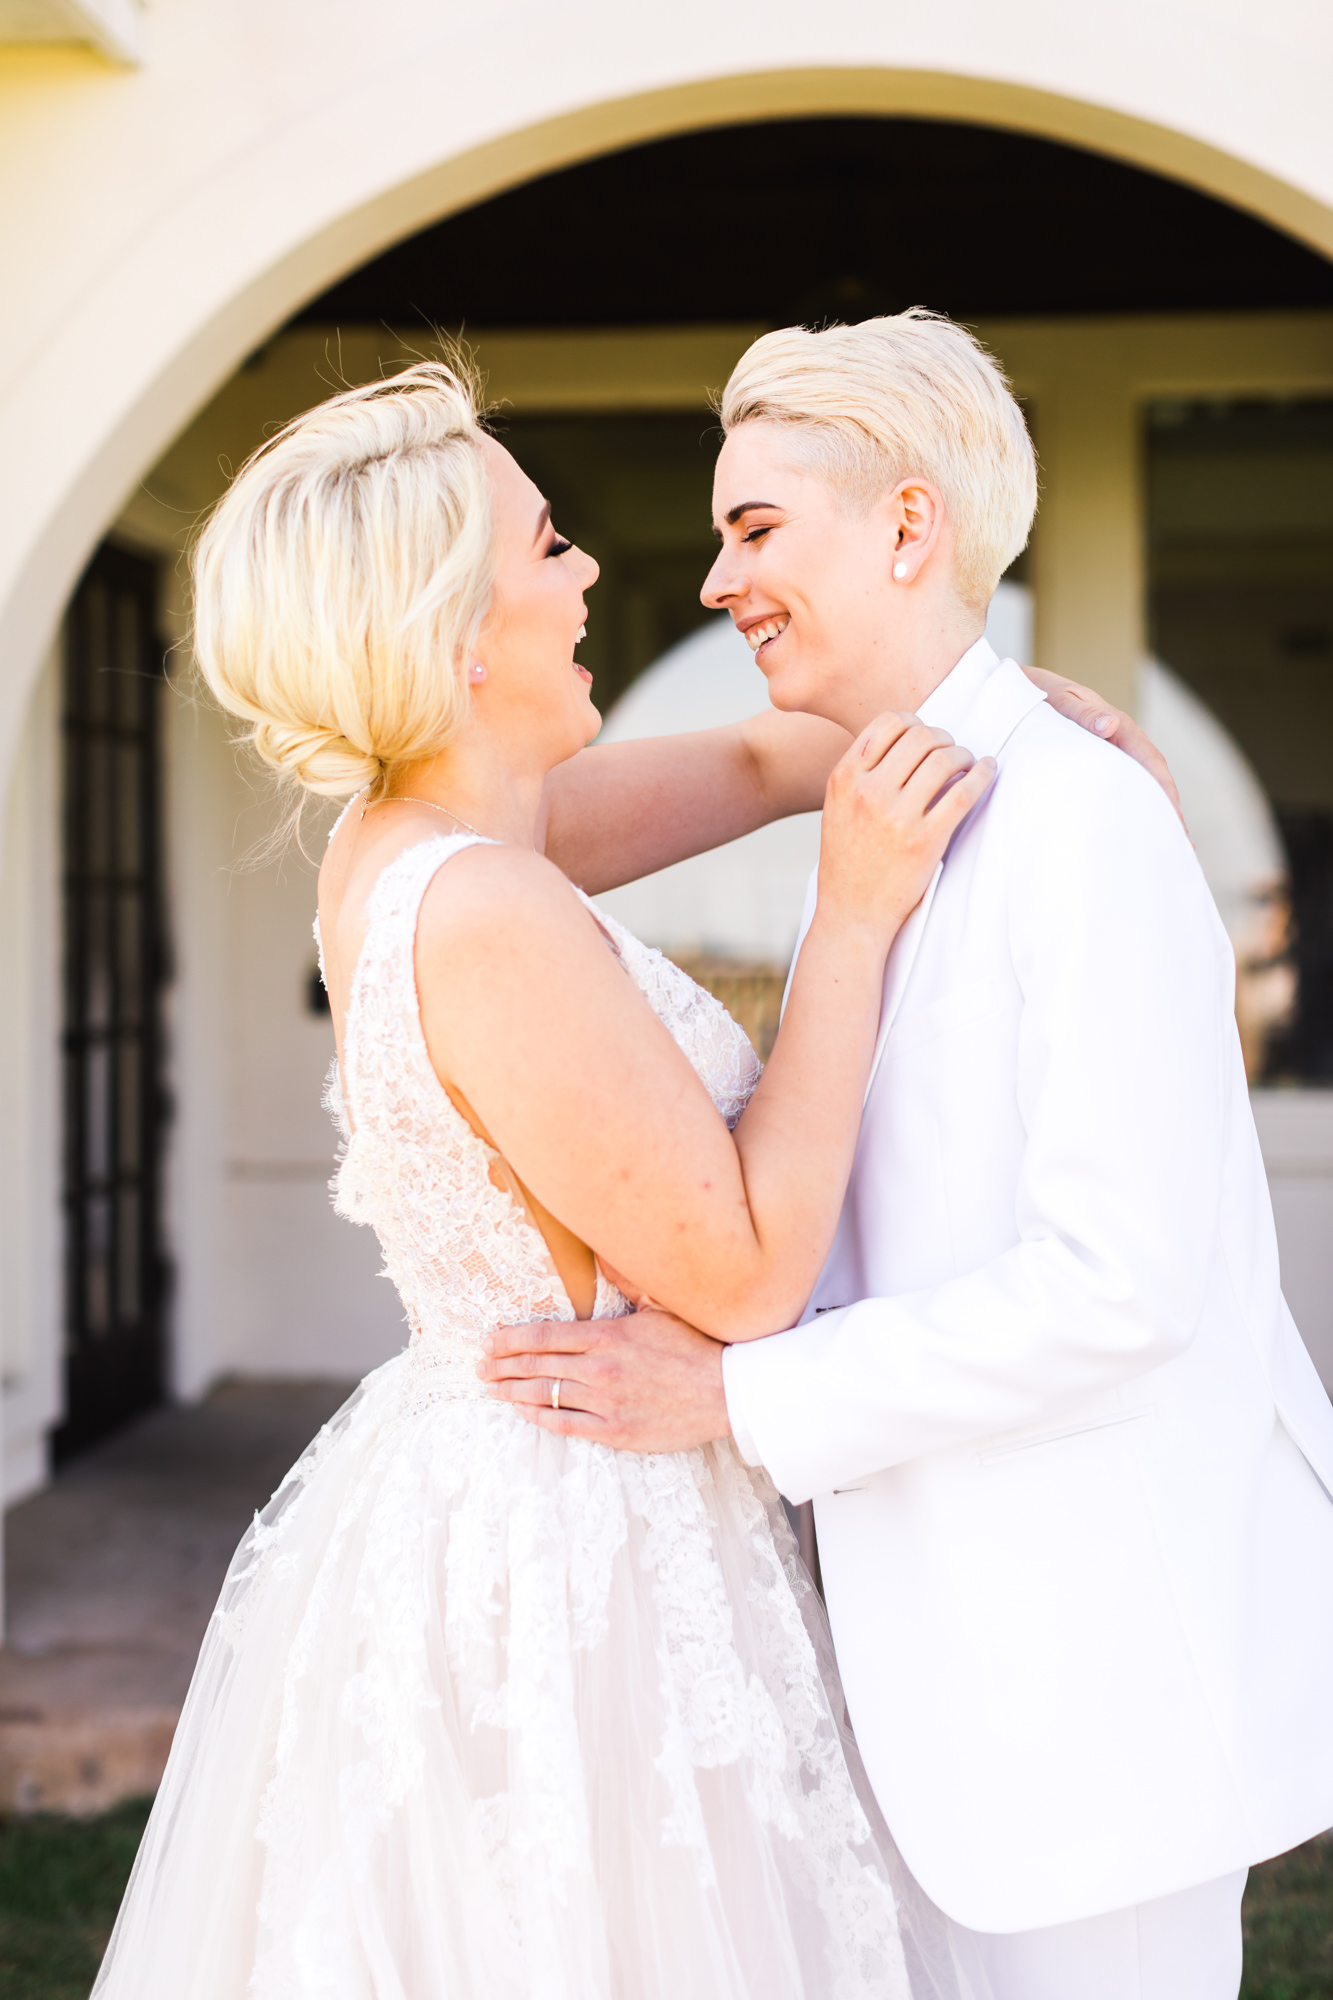 bridal couple embracing and laughing together